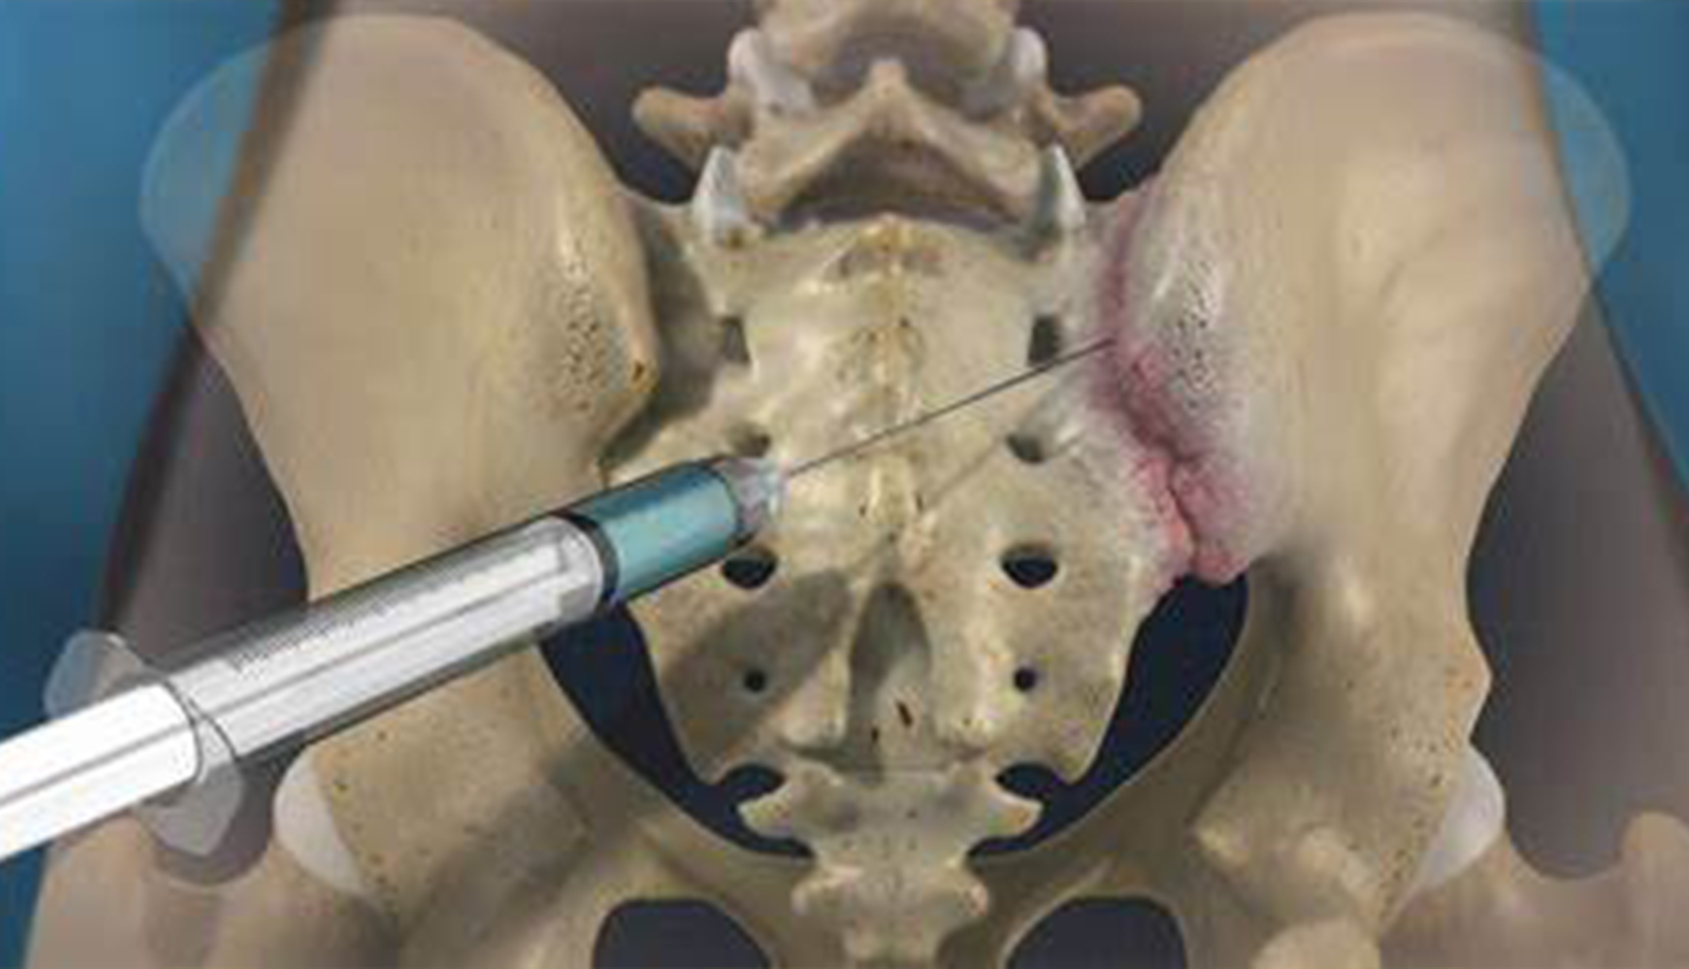 Sacroiliac joint injection